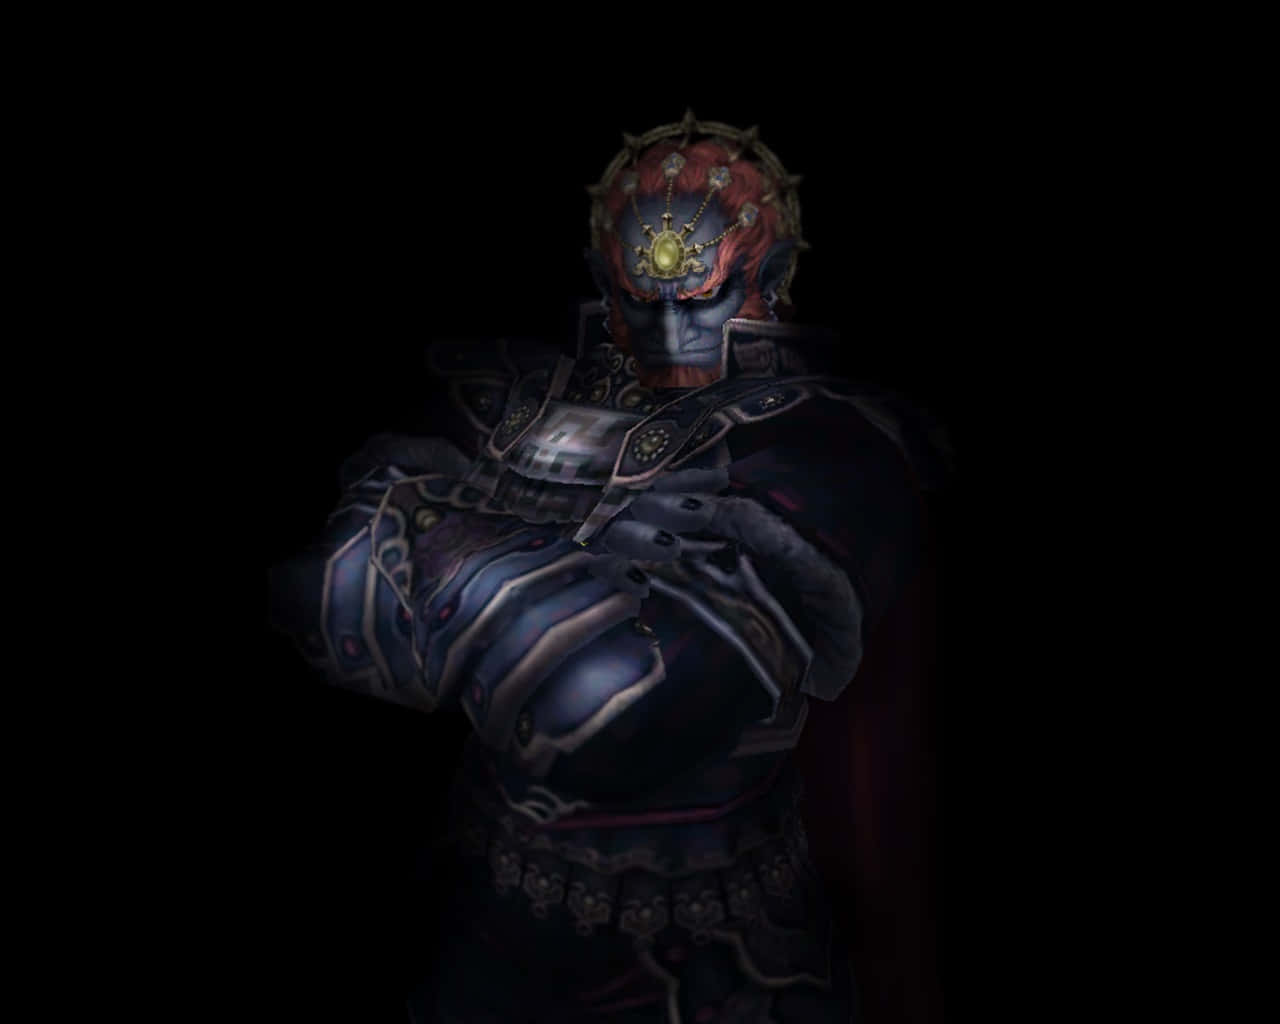 The King of Evil Ganondorf rules Hyrule in this powerful and captivating image Wallpaper